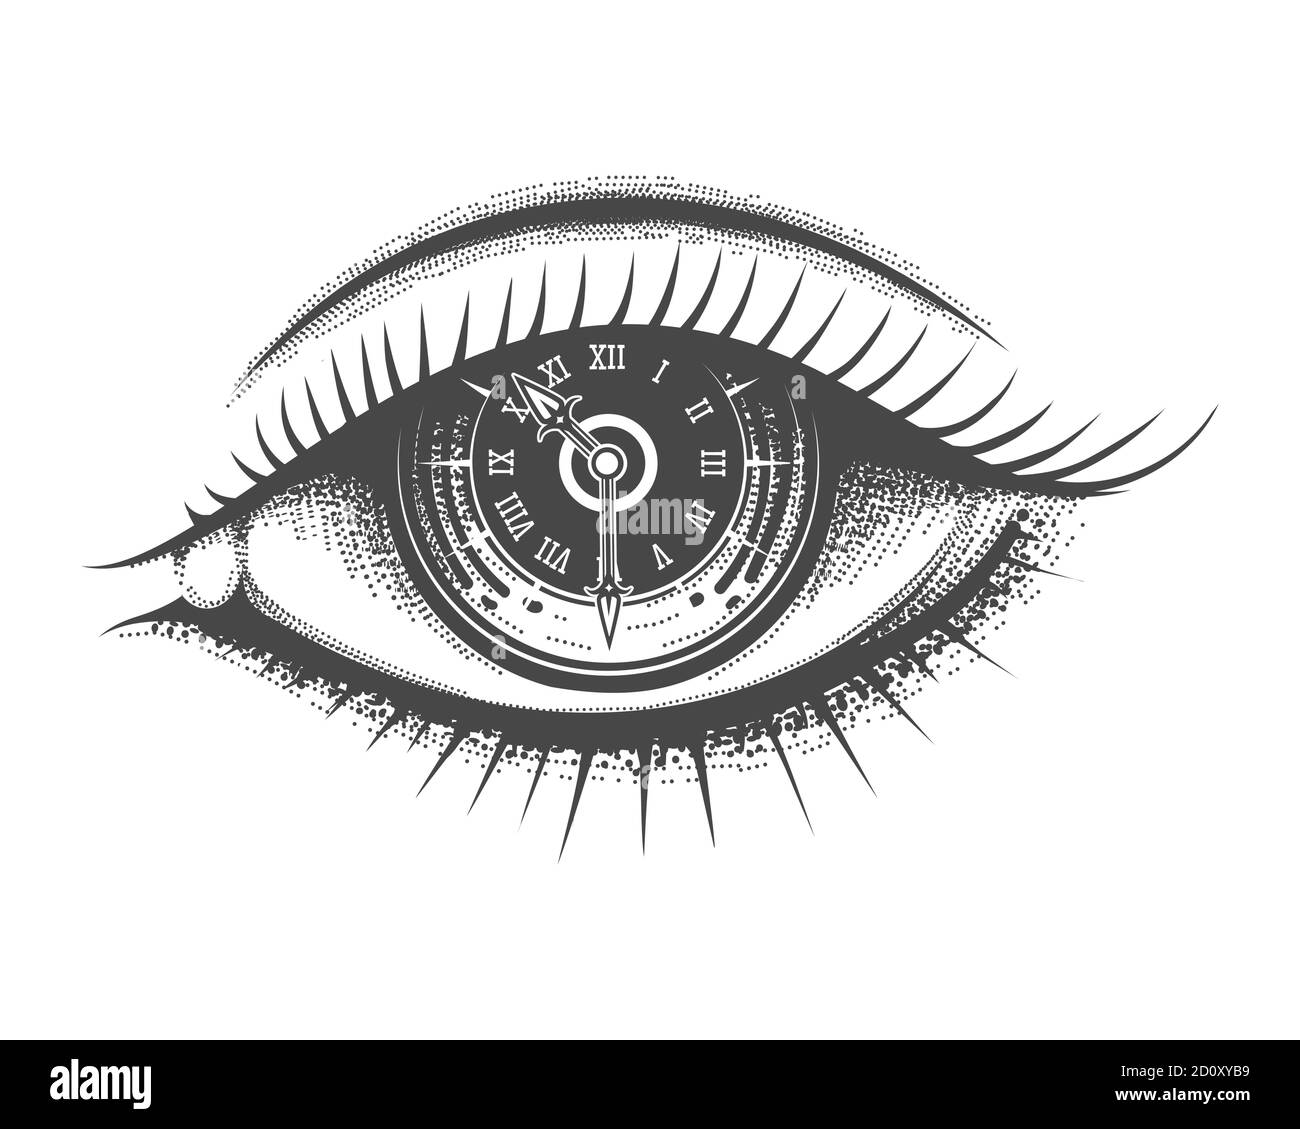 Hand Drawn Human Eye with Clock face inside Pupil. Vector illustration. Stock Vector